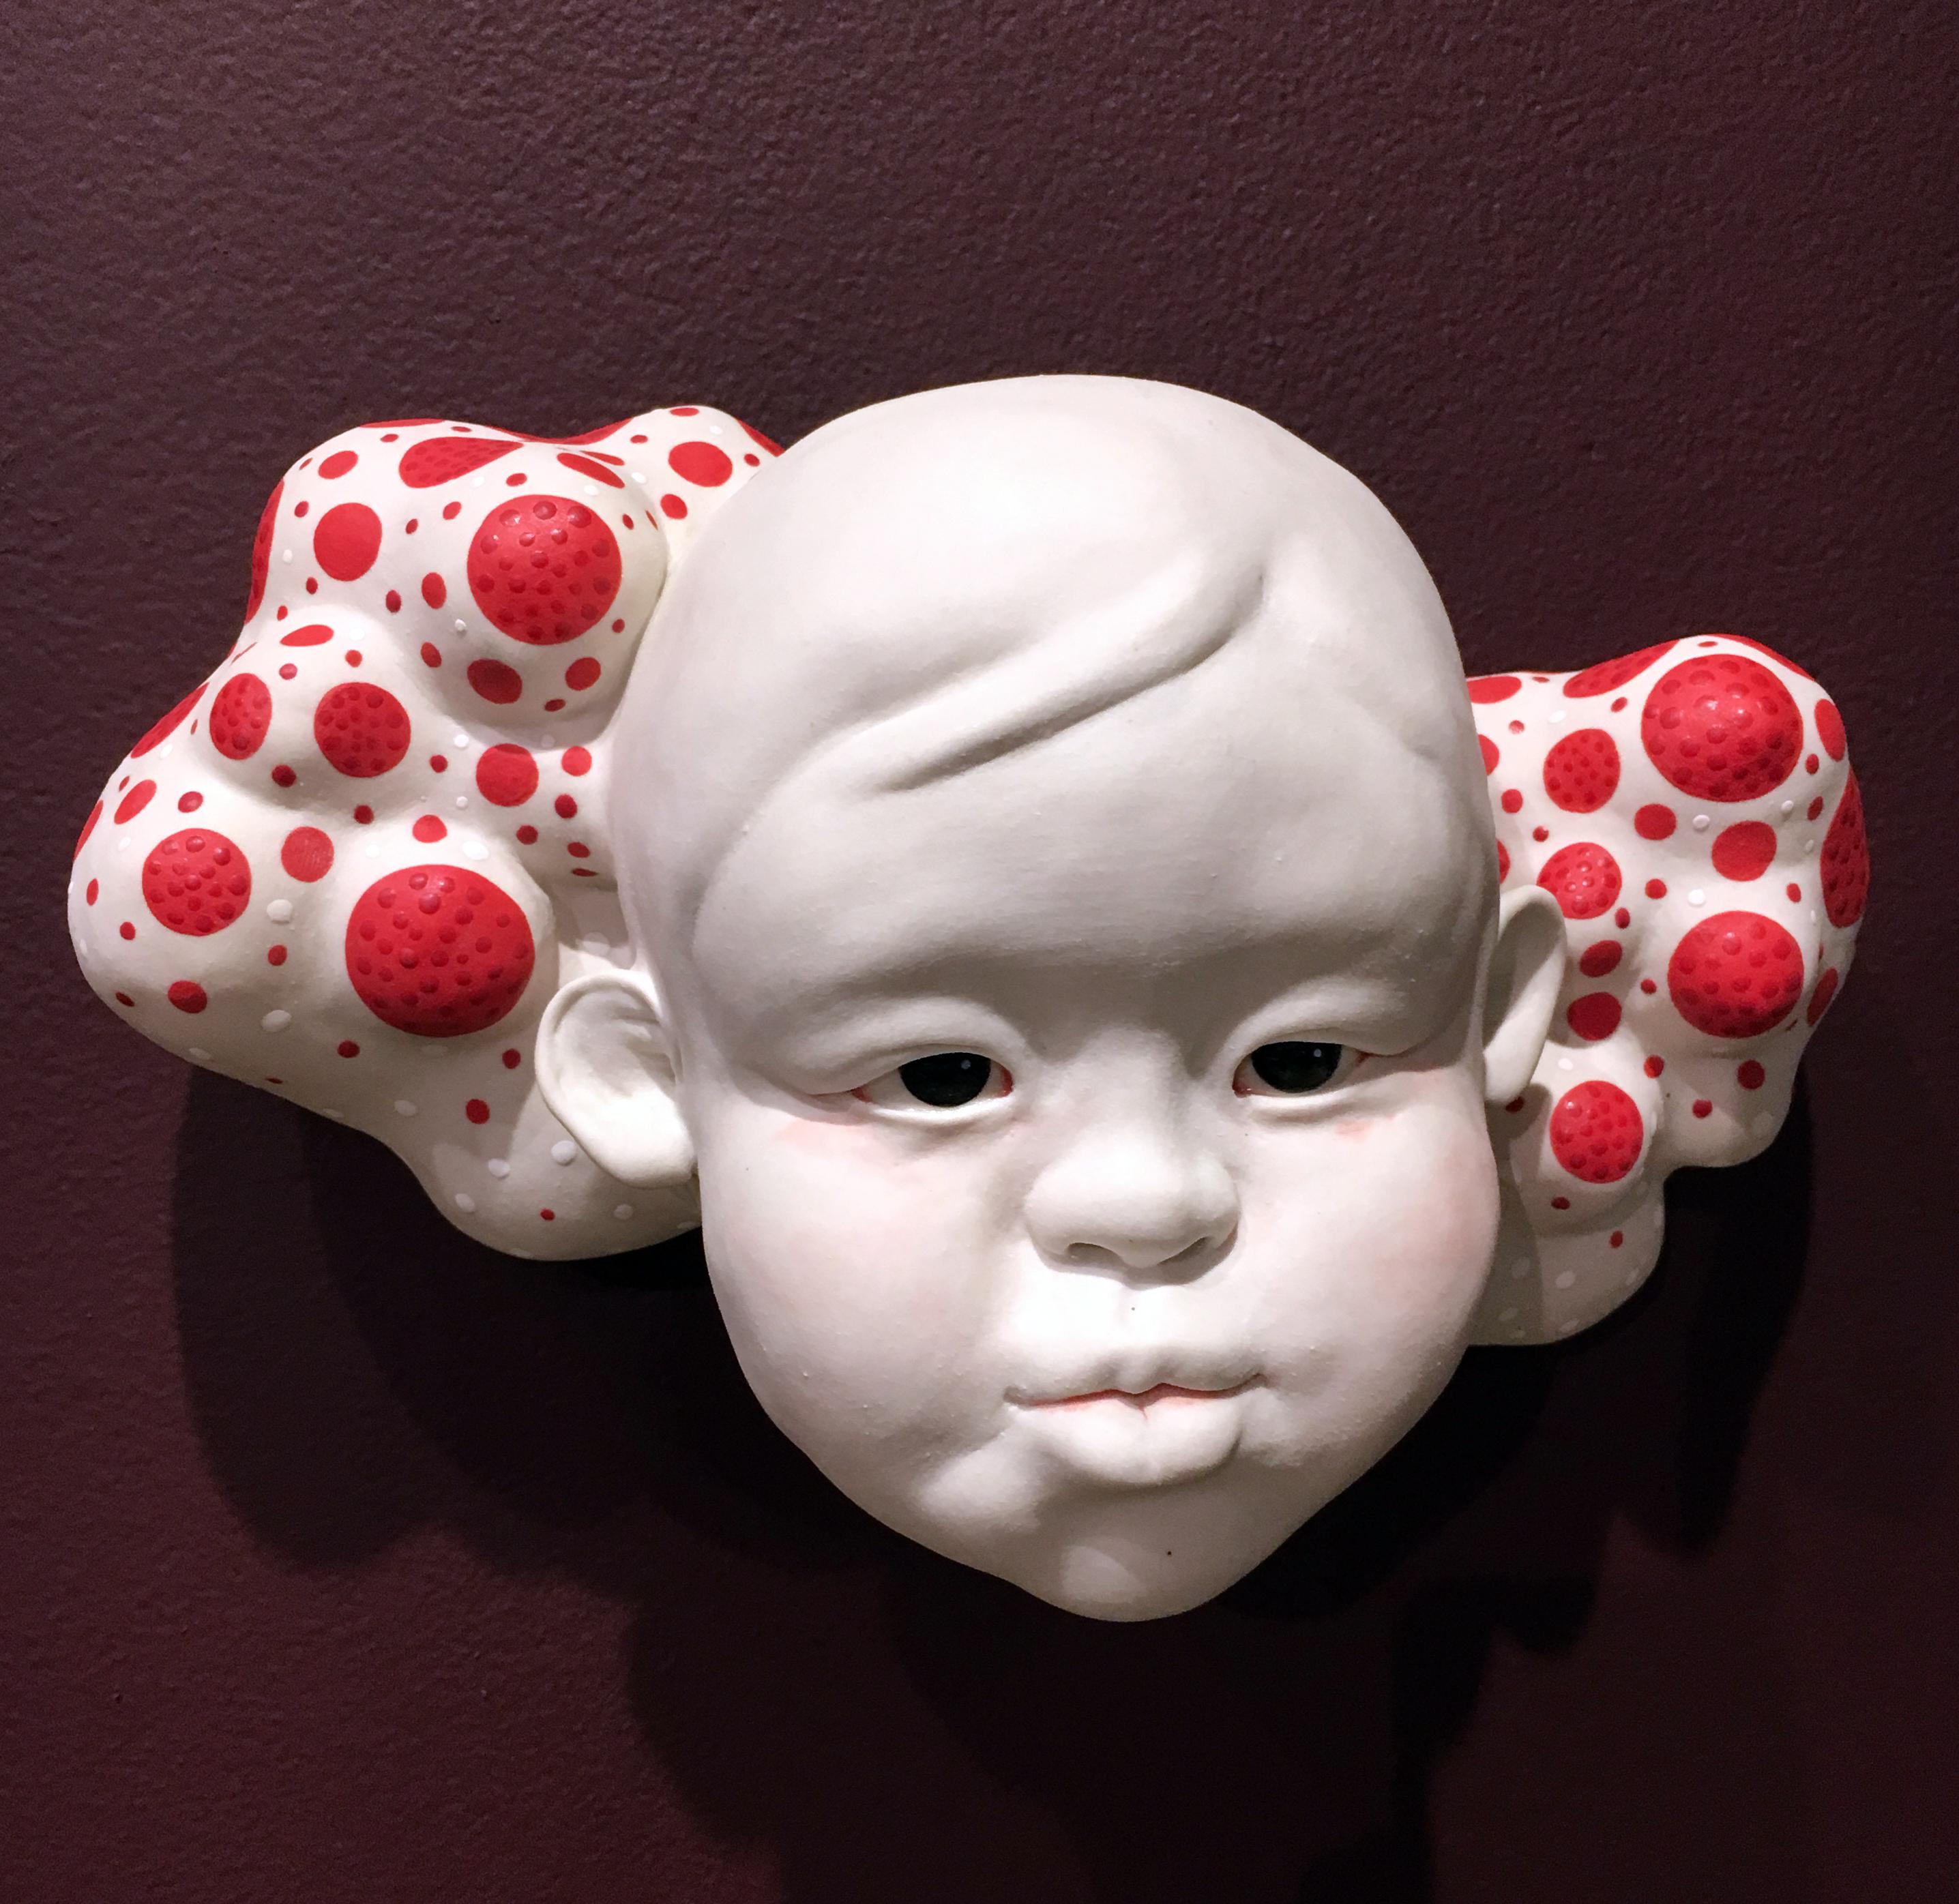 Kyungmin Park is a figurative ceramic sculptor drawing inspiration from childlike perspectives. Contrasting the darker emotions and restricted psyche of adulthood with the boundless consciousness of children, Kyungmin’s sculptures confront the view